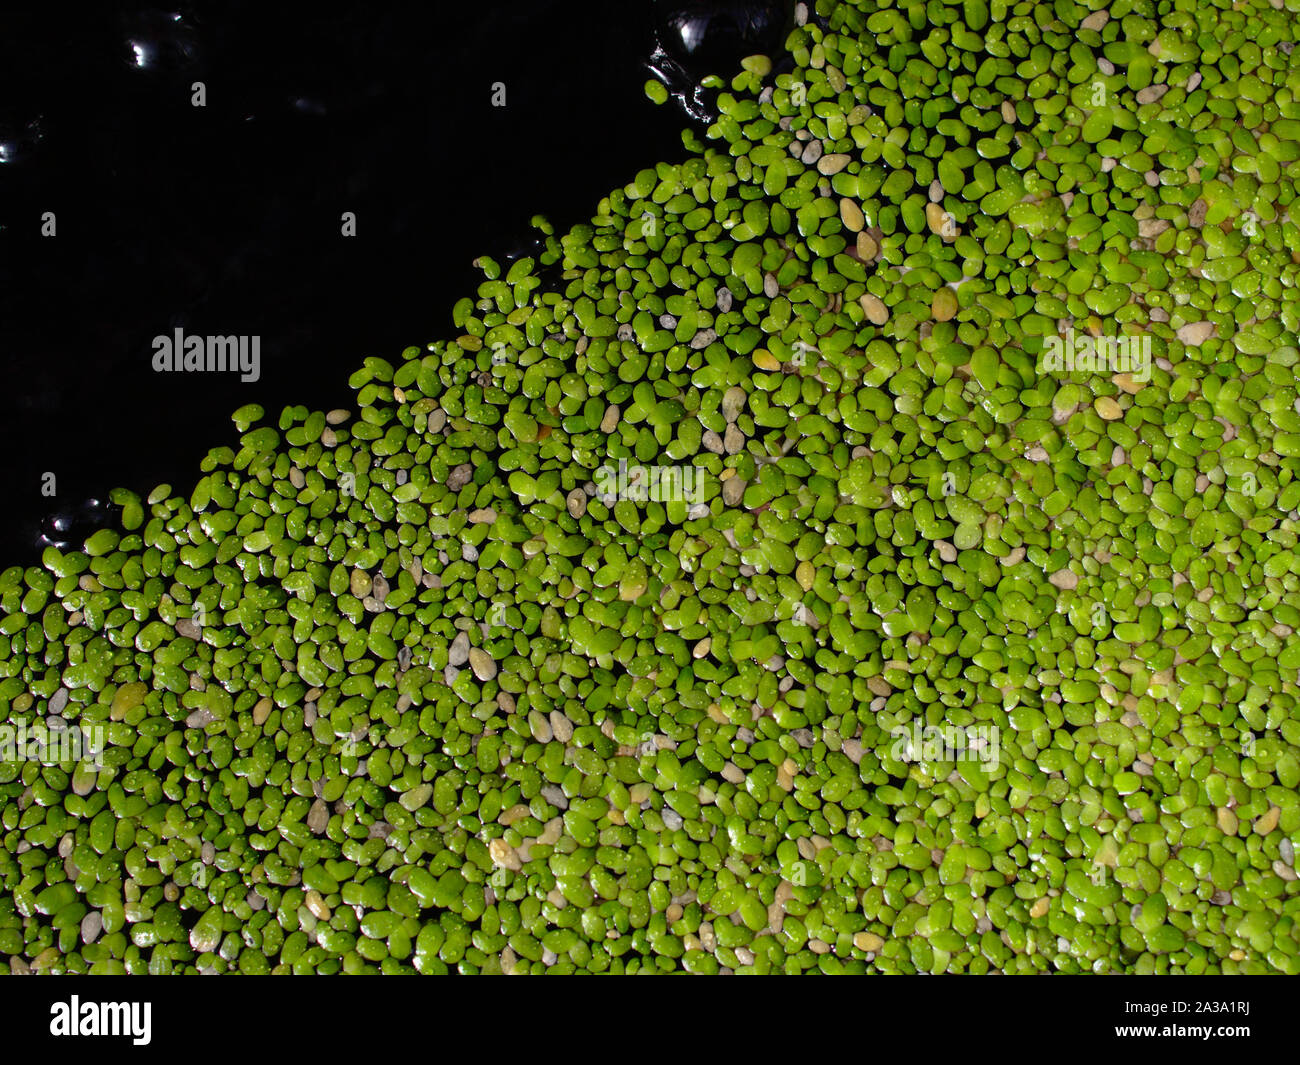 Duckweed (Spirodela polyrhiza) covering the surface of an indoor freshwater pond. Stock Photo